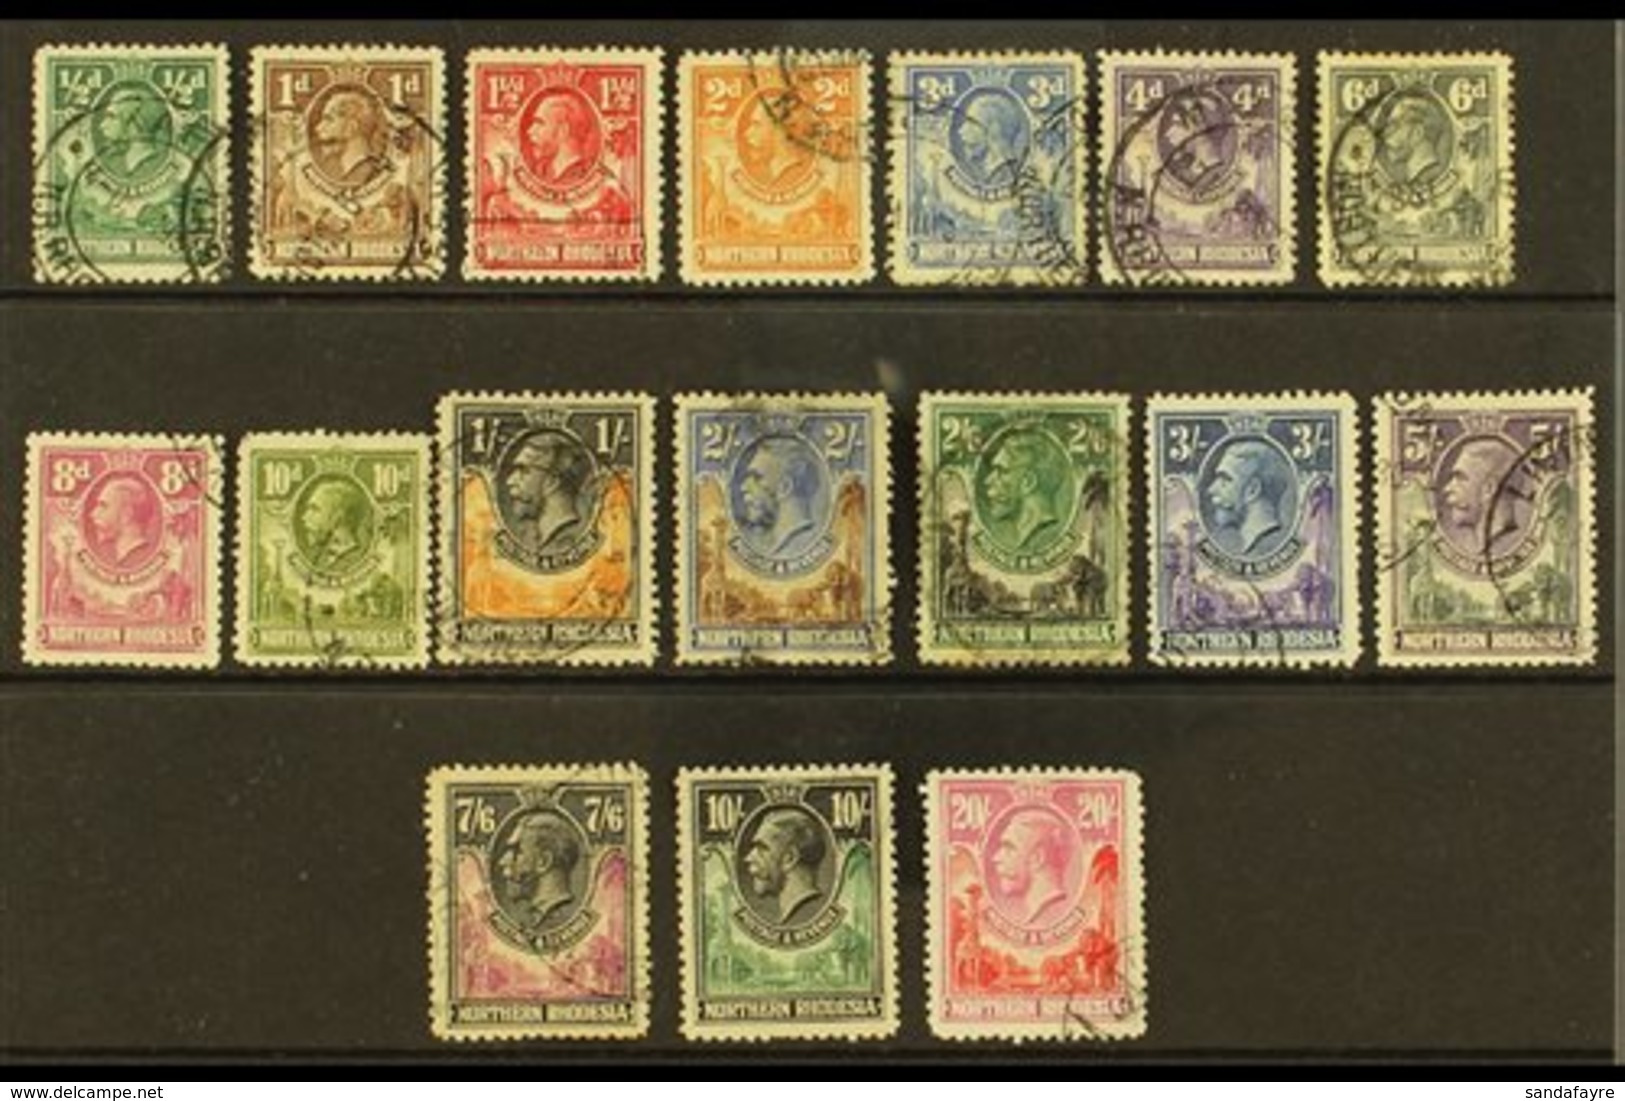 1925 Geo V Set Complete To 20s, SG 1/17, 10s And 20s Fiscal Cancels Nonetheless An Attractive Set. Cat £850. (17 Stamps) - Nordrhodesien (...-1963)